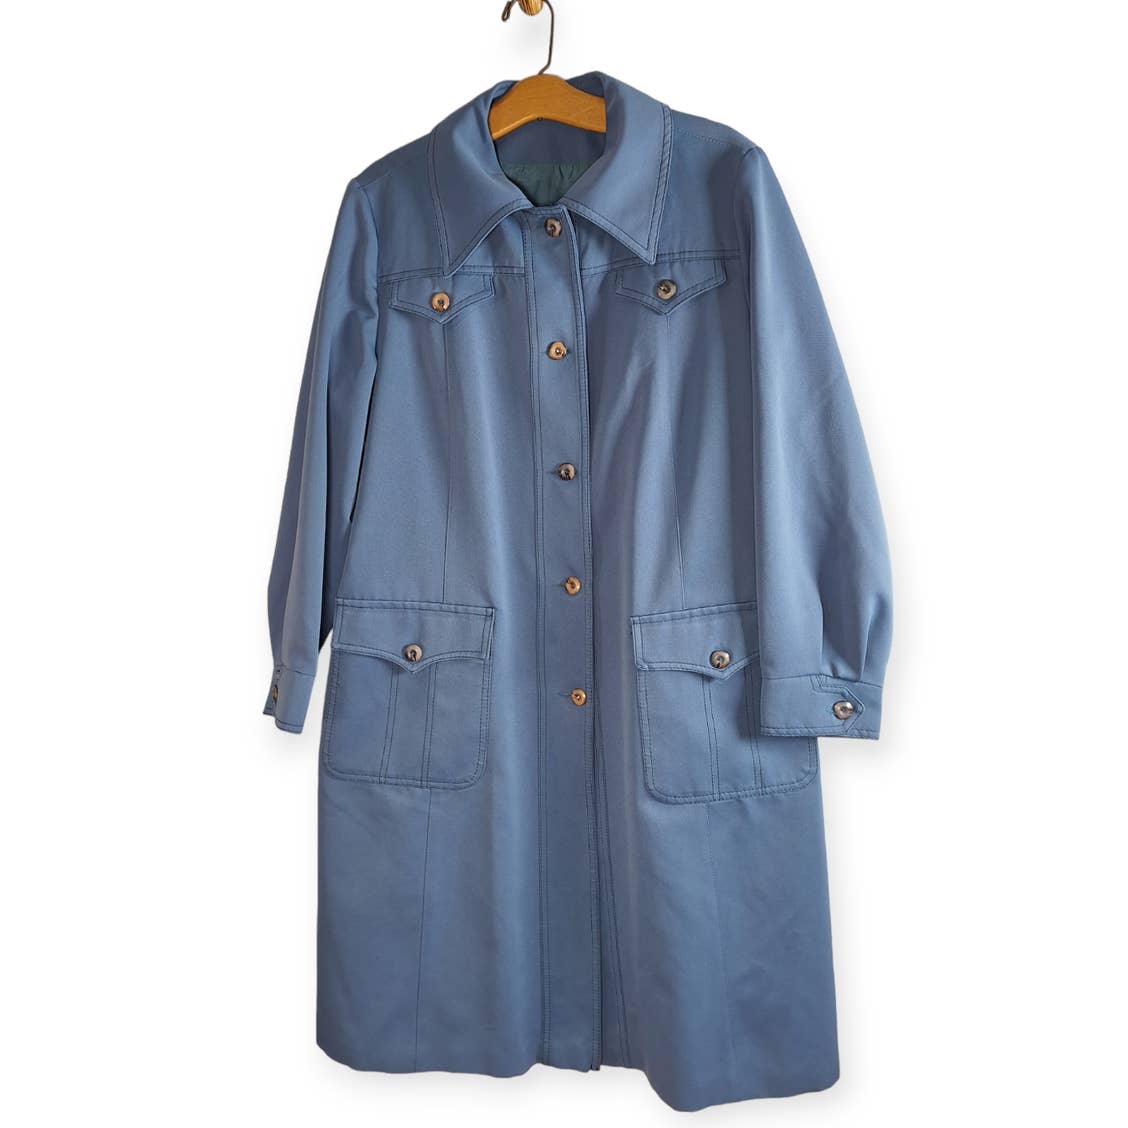 Vintage 70s Blue Polyester Trench Coat Women's Size Large 13/14 - themallvintage The Mall Vintage